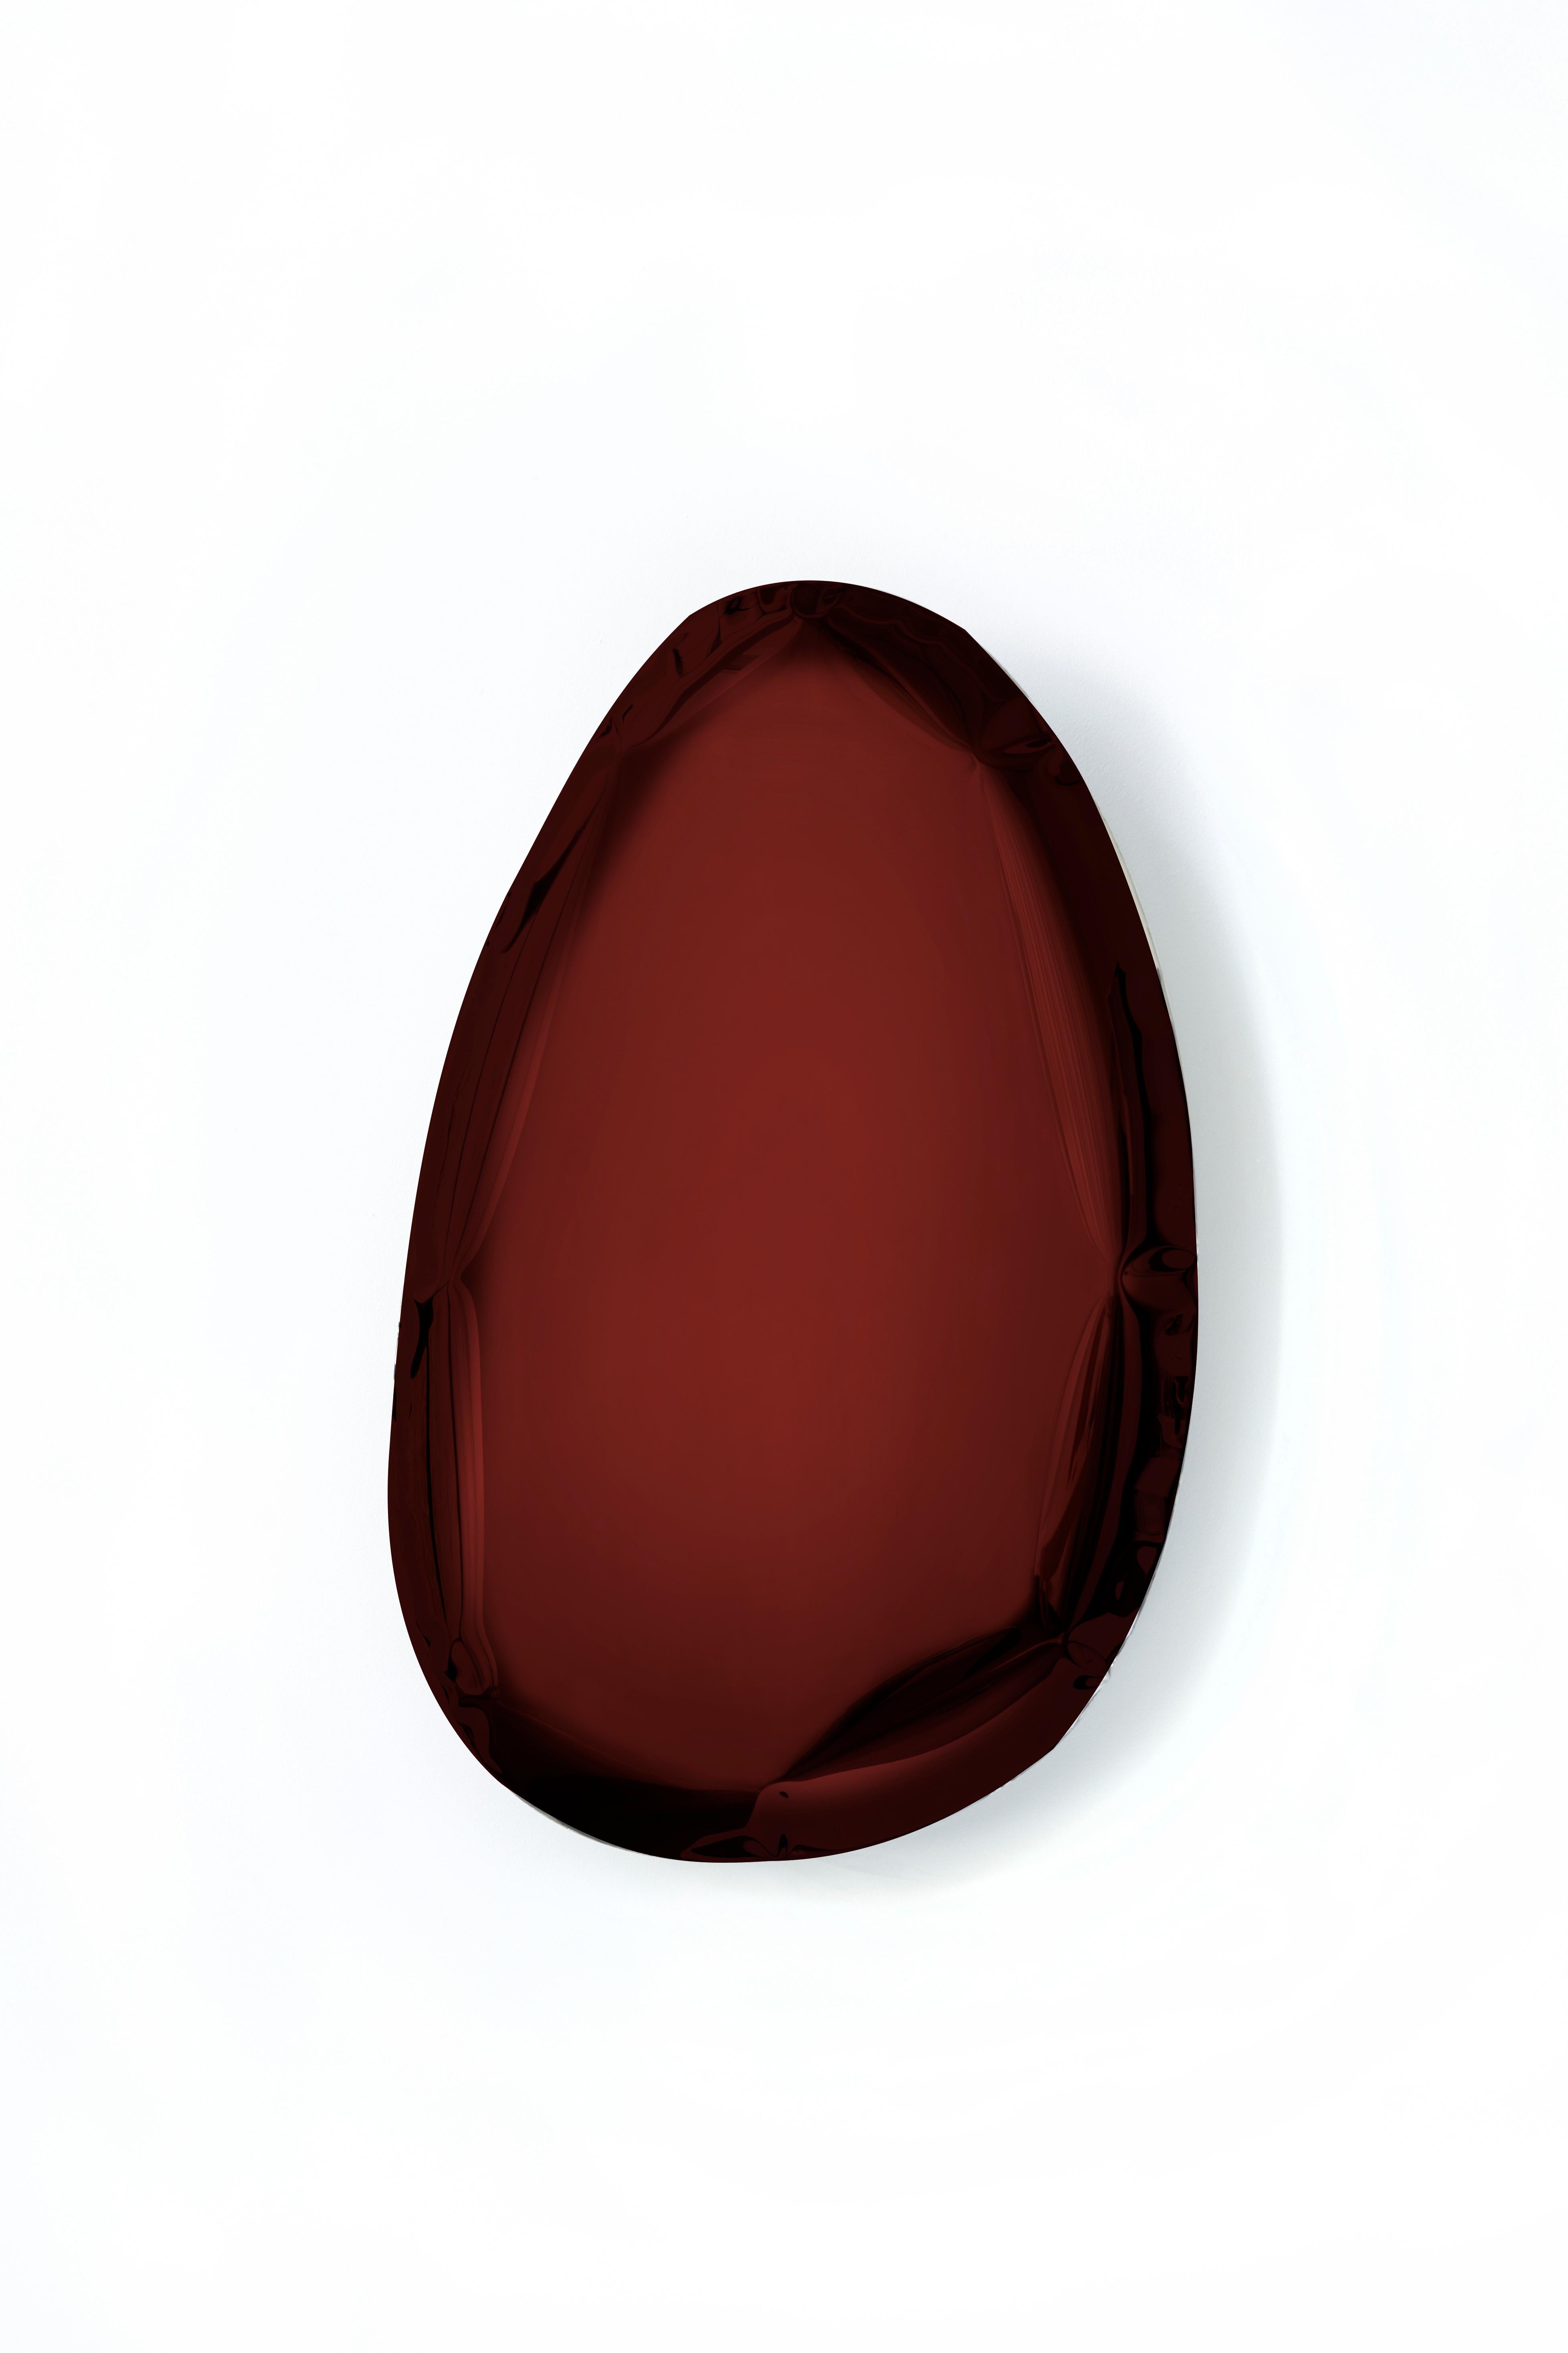 Contemporary Mirror Tafla O3 Rubin Red, in Polished Stainless Steel by Zieta For Sale